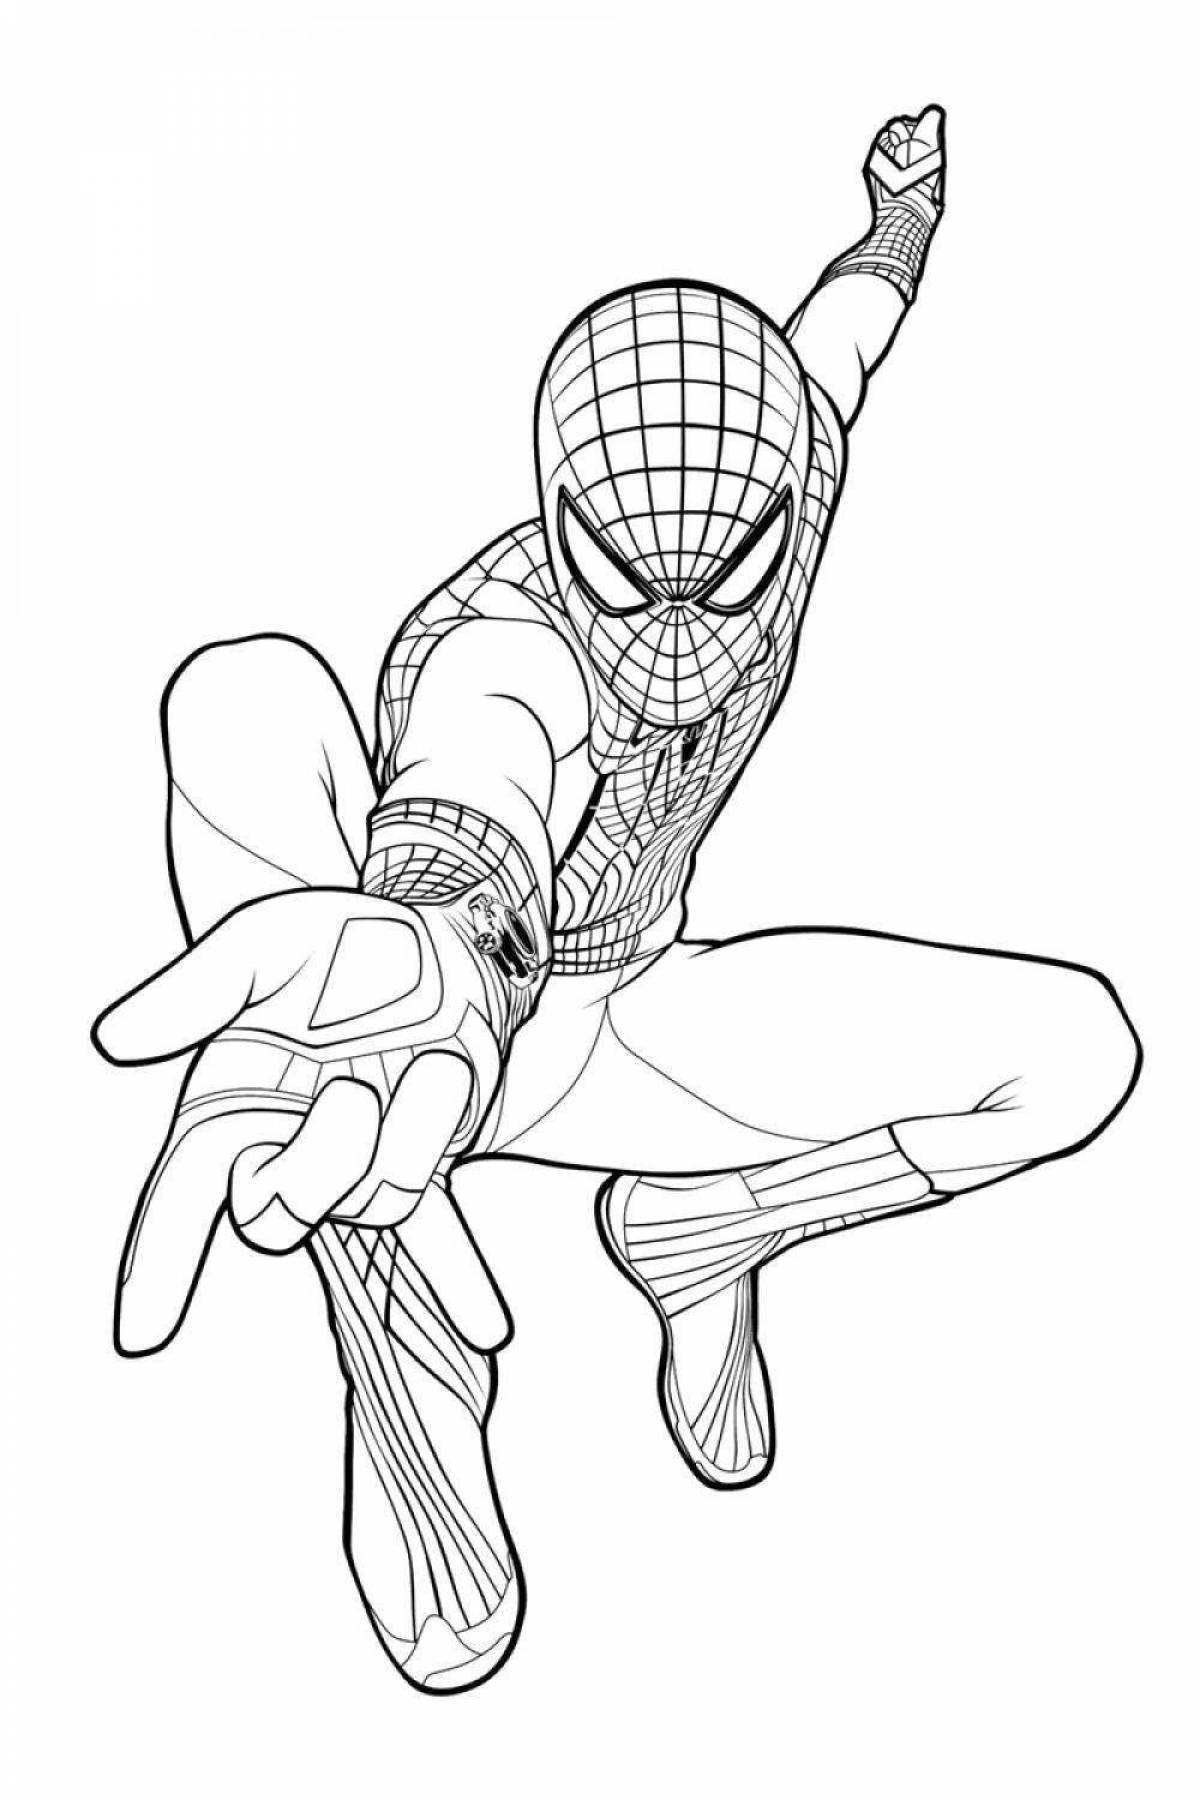 Spiderman glitter coloring page